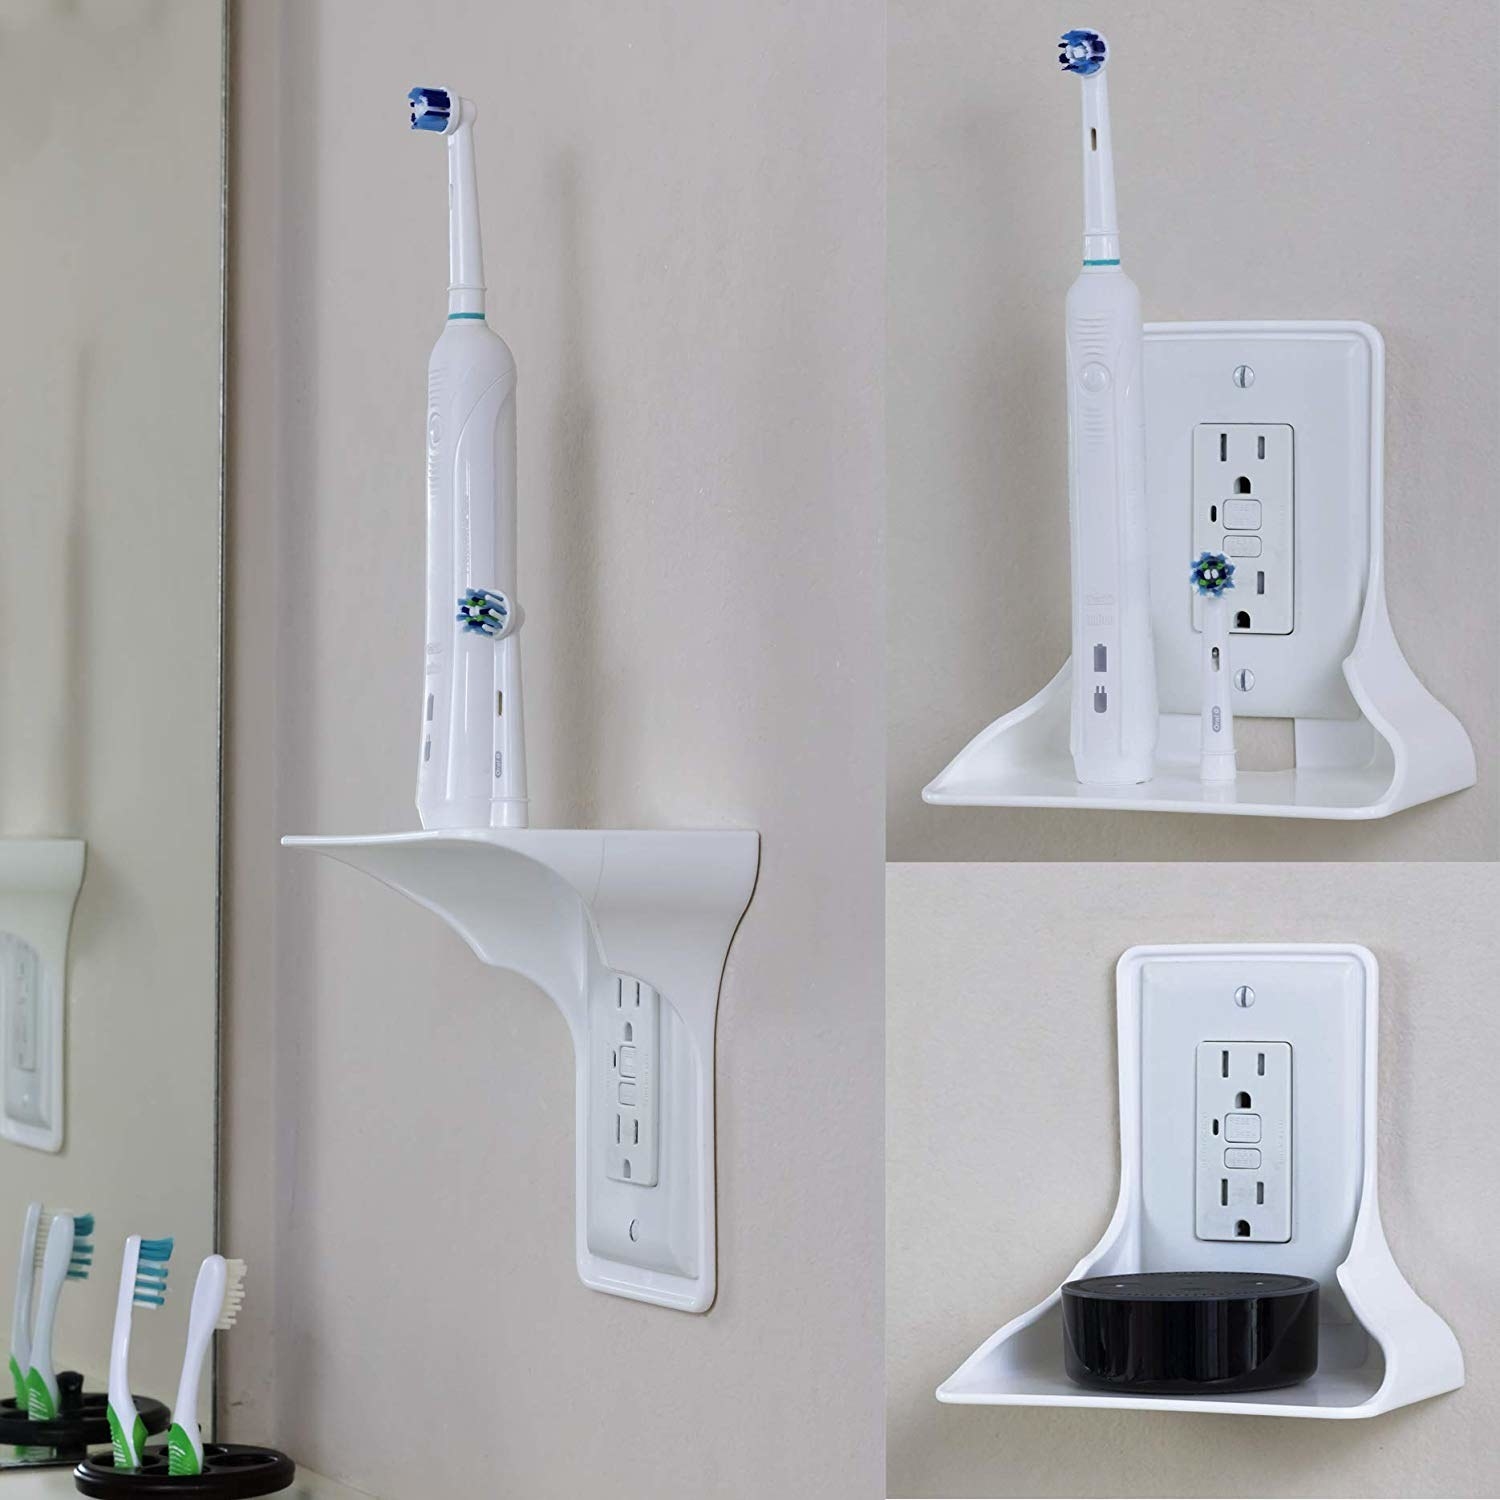 outlet shelf that fits underneath a switchplate to hold an electric toothbrush or a speaker